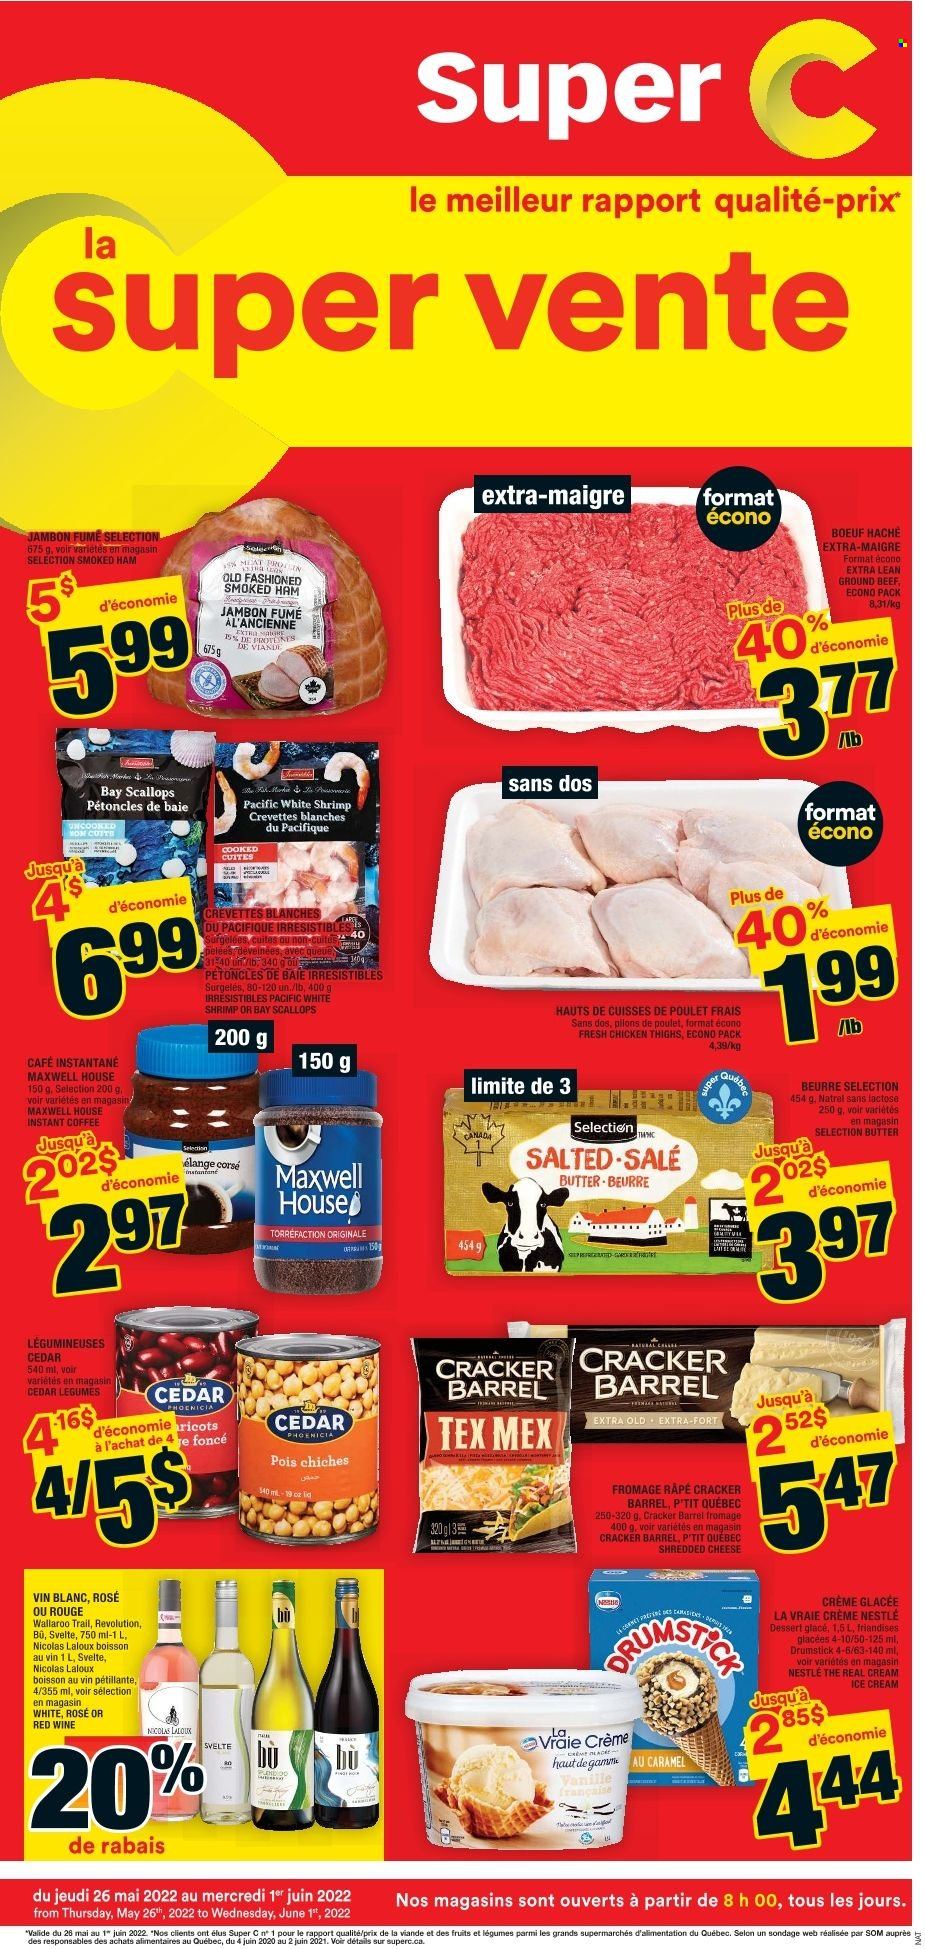 thumbnail - Super C Flyer - May 26, 2022 - June 01, 2022 - Sales products - scallops, shrimps, ham, smoked ham, shredded cheese, butter, ice cream, crackers, caramel, Maxwell House, instant coffee, red wine, wine, rosé wine, chicken thighs, chicken, beef meat, ground beef, Nestlé. Page 1.